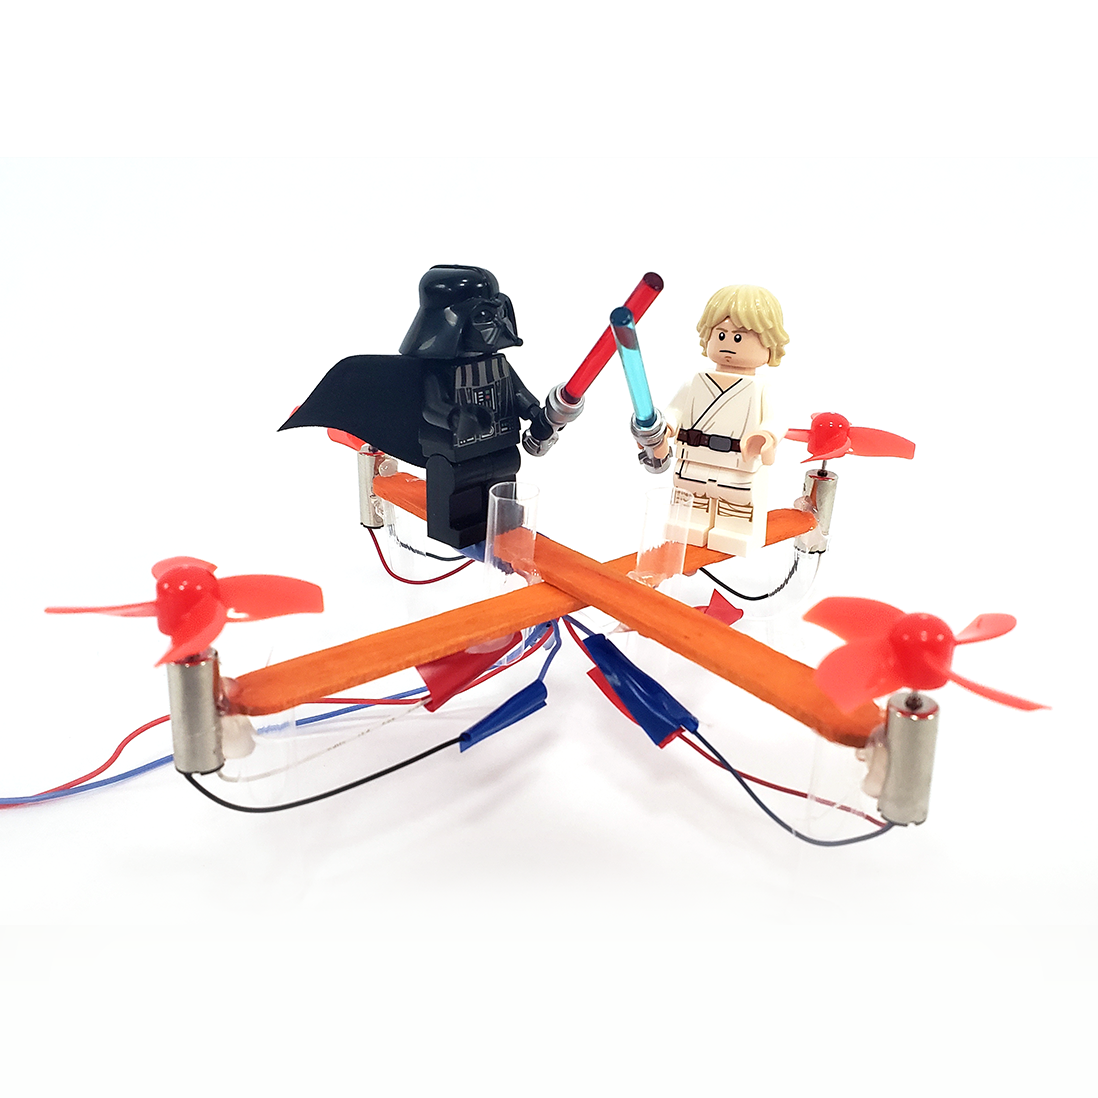 Mini popsicle stick drone with Star Wars characters for Star Wars Day